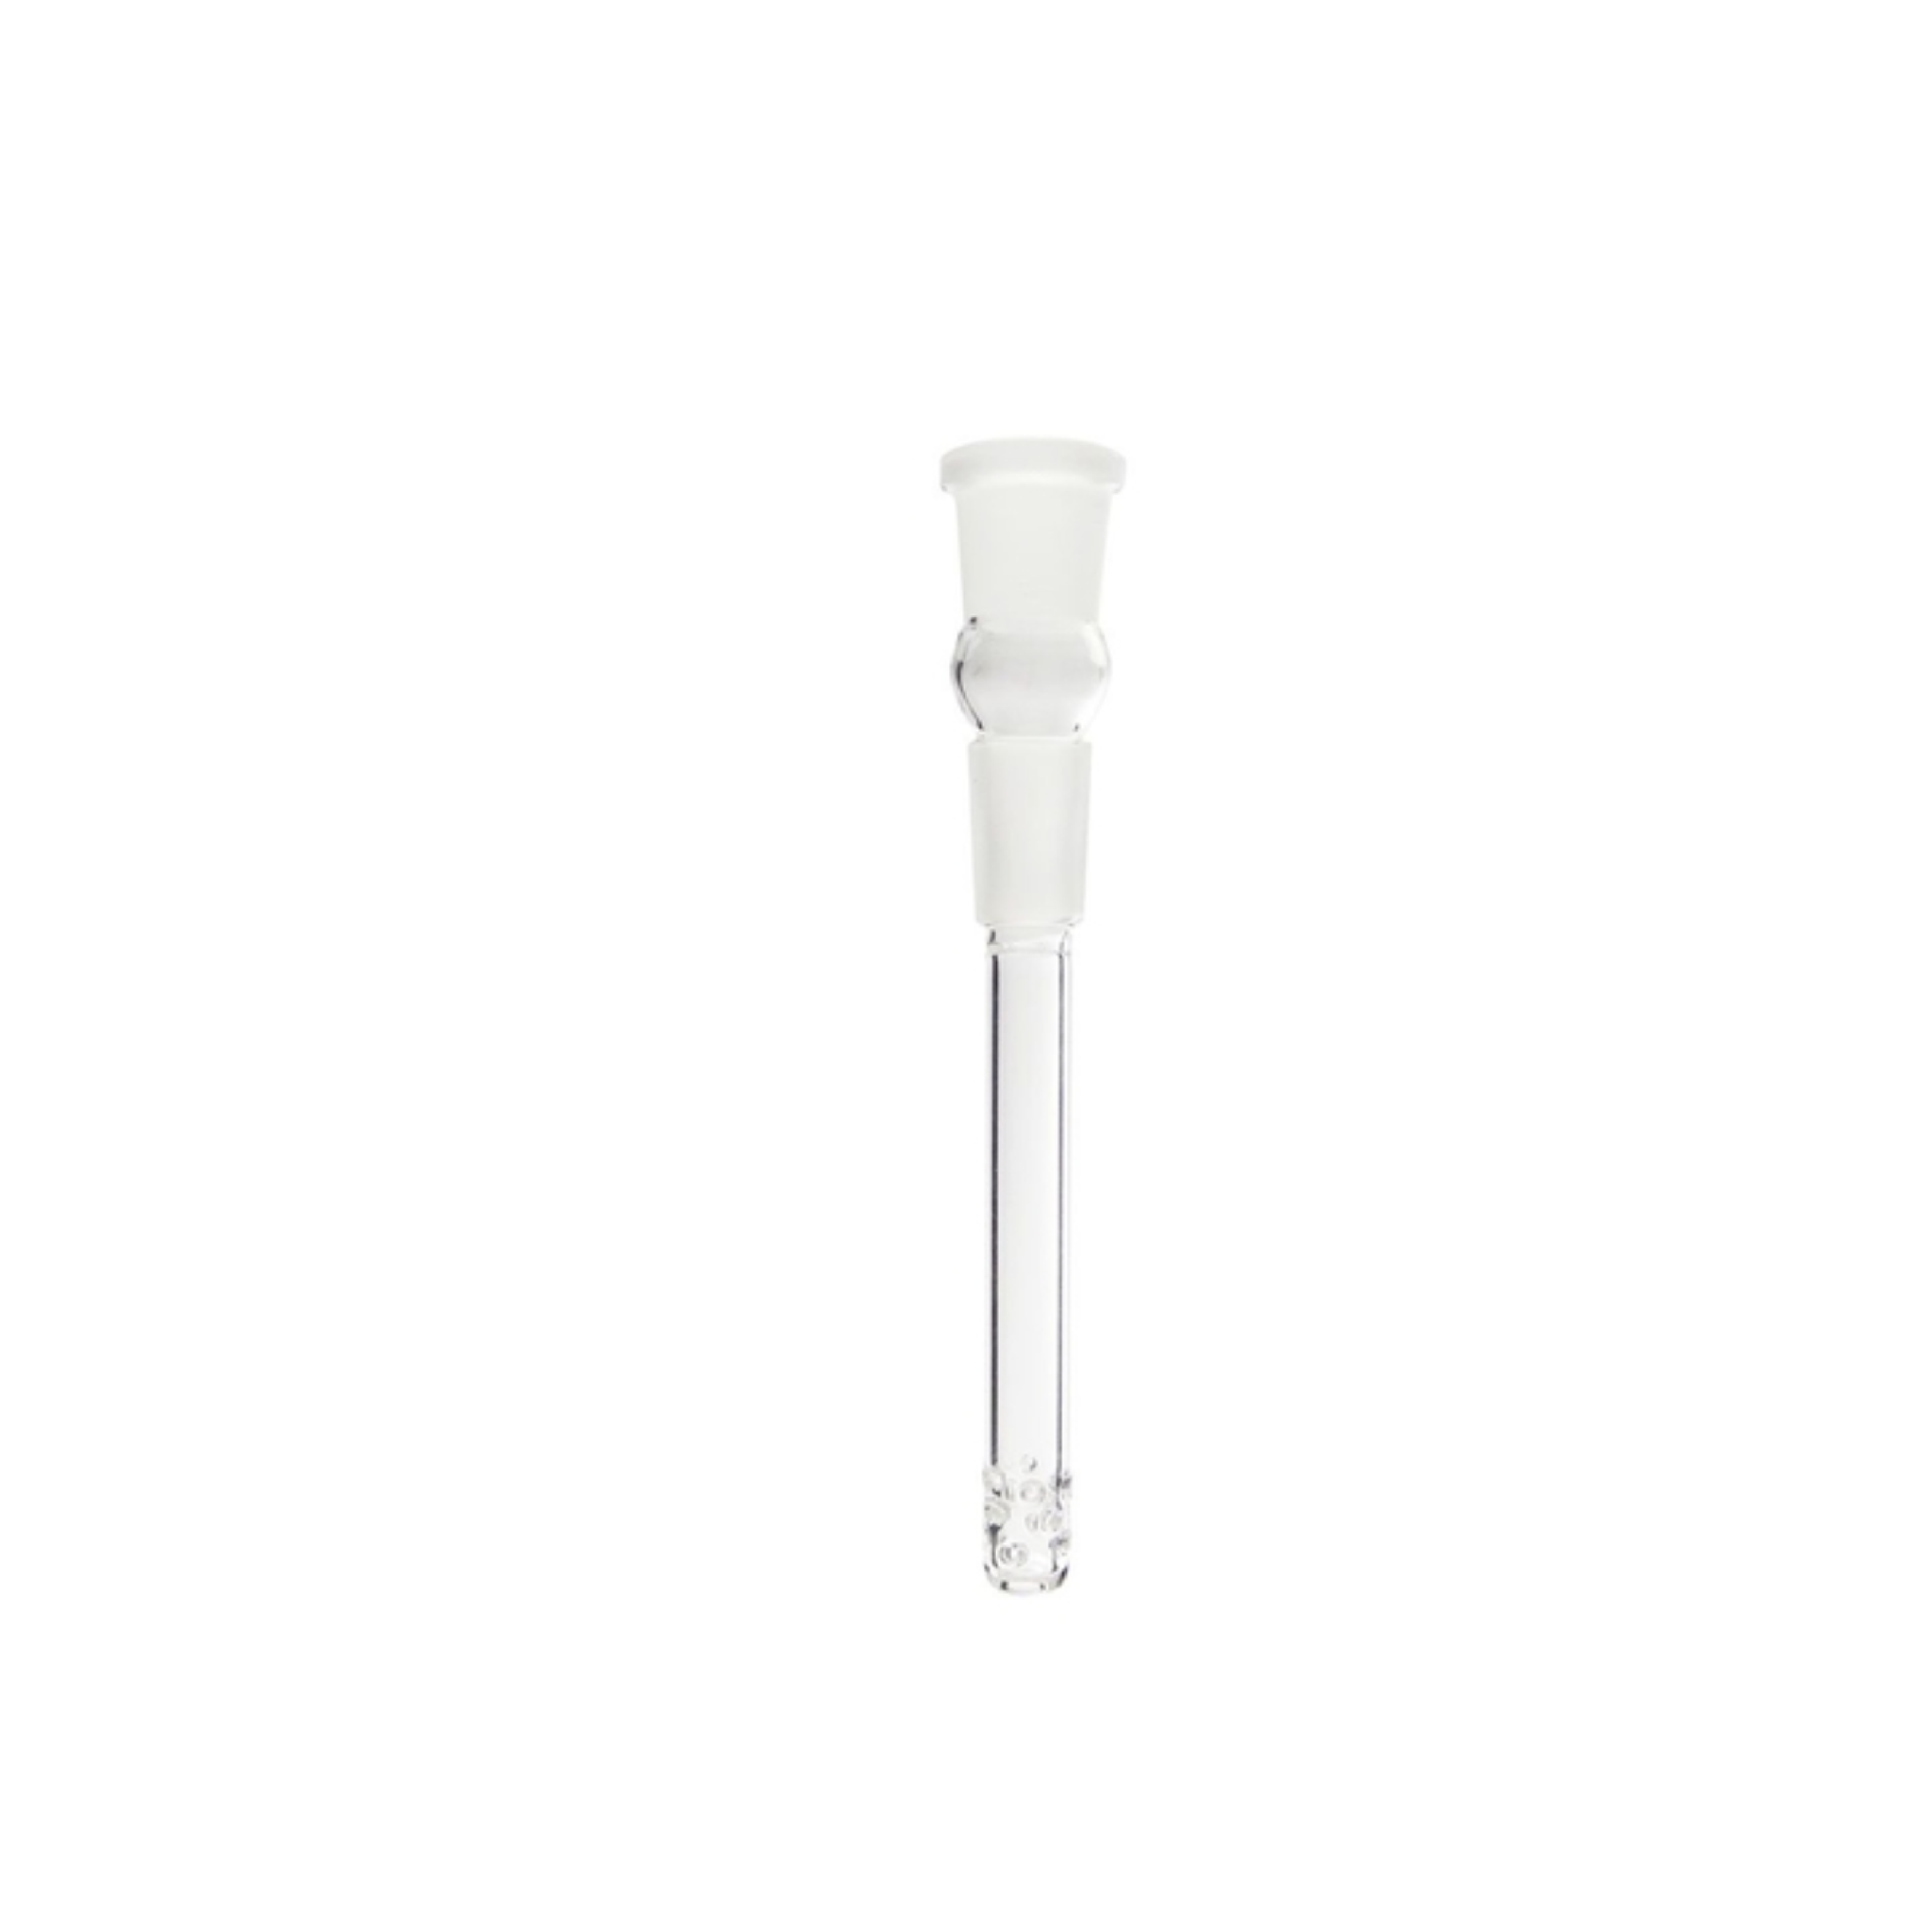 Downstem with Diffuser (19mm)